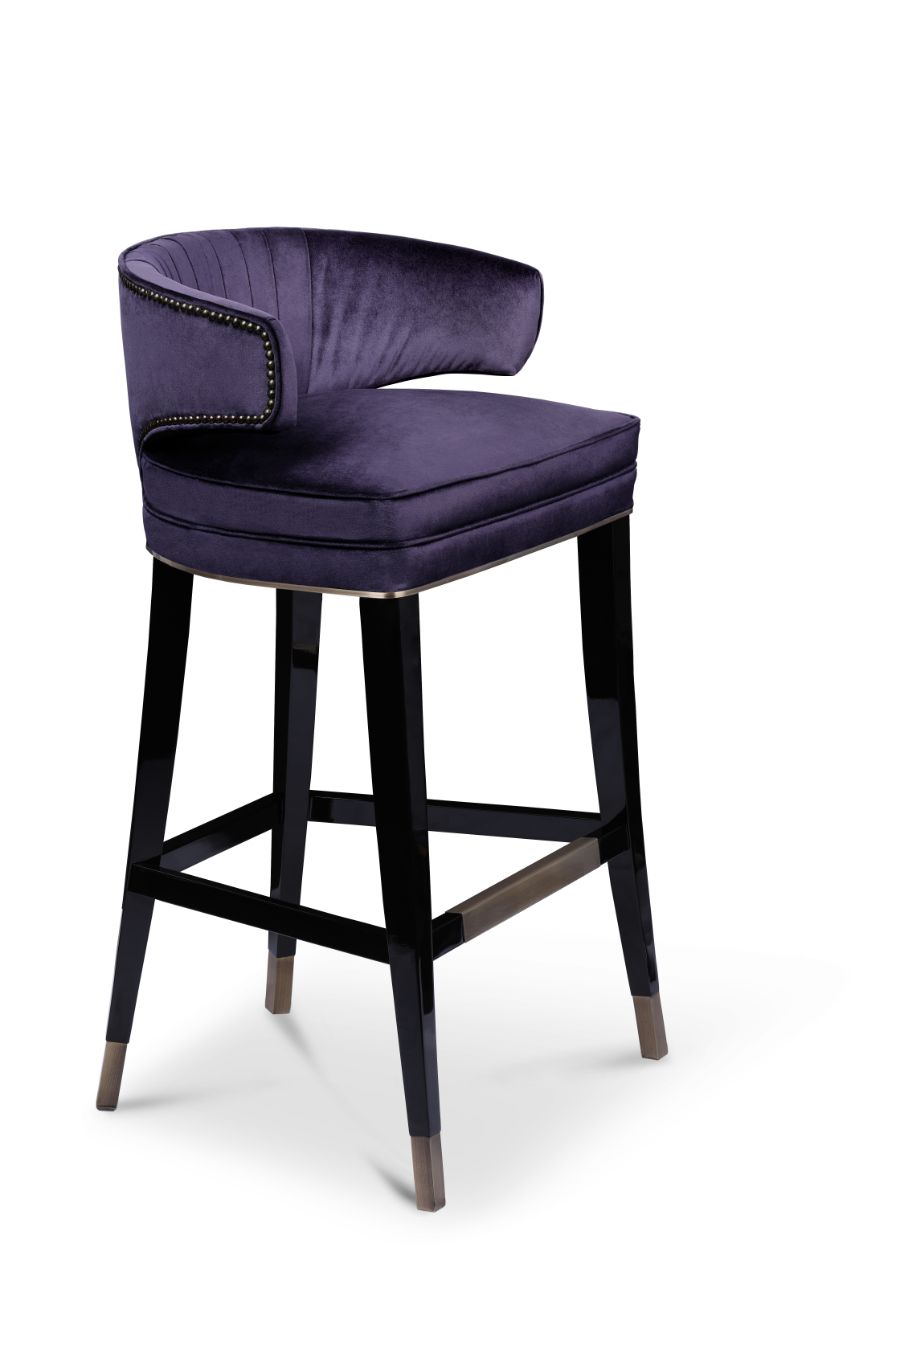 Bar Chairs: 25 Fiercely Designed Chairs that Influence Design Trends